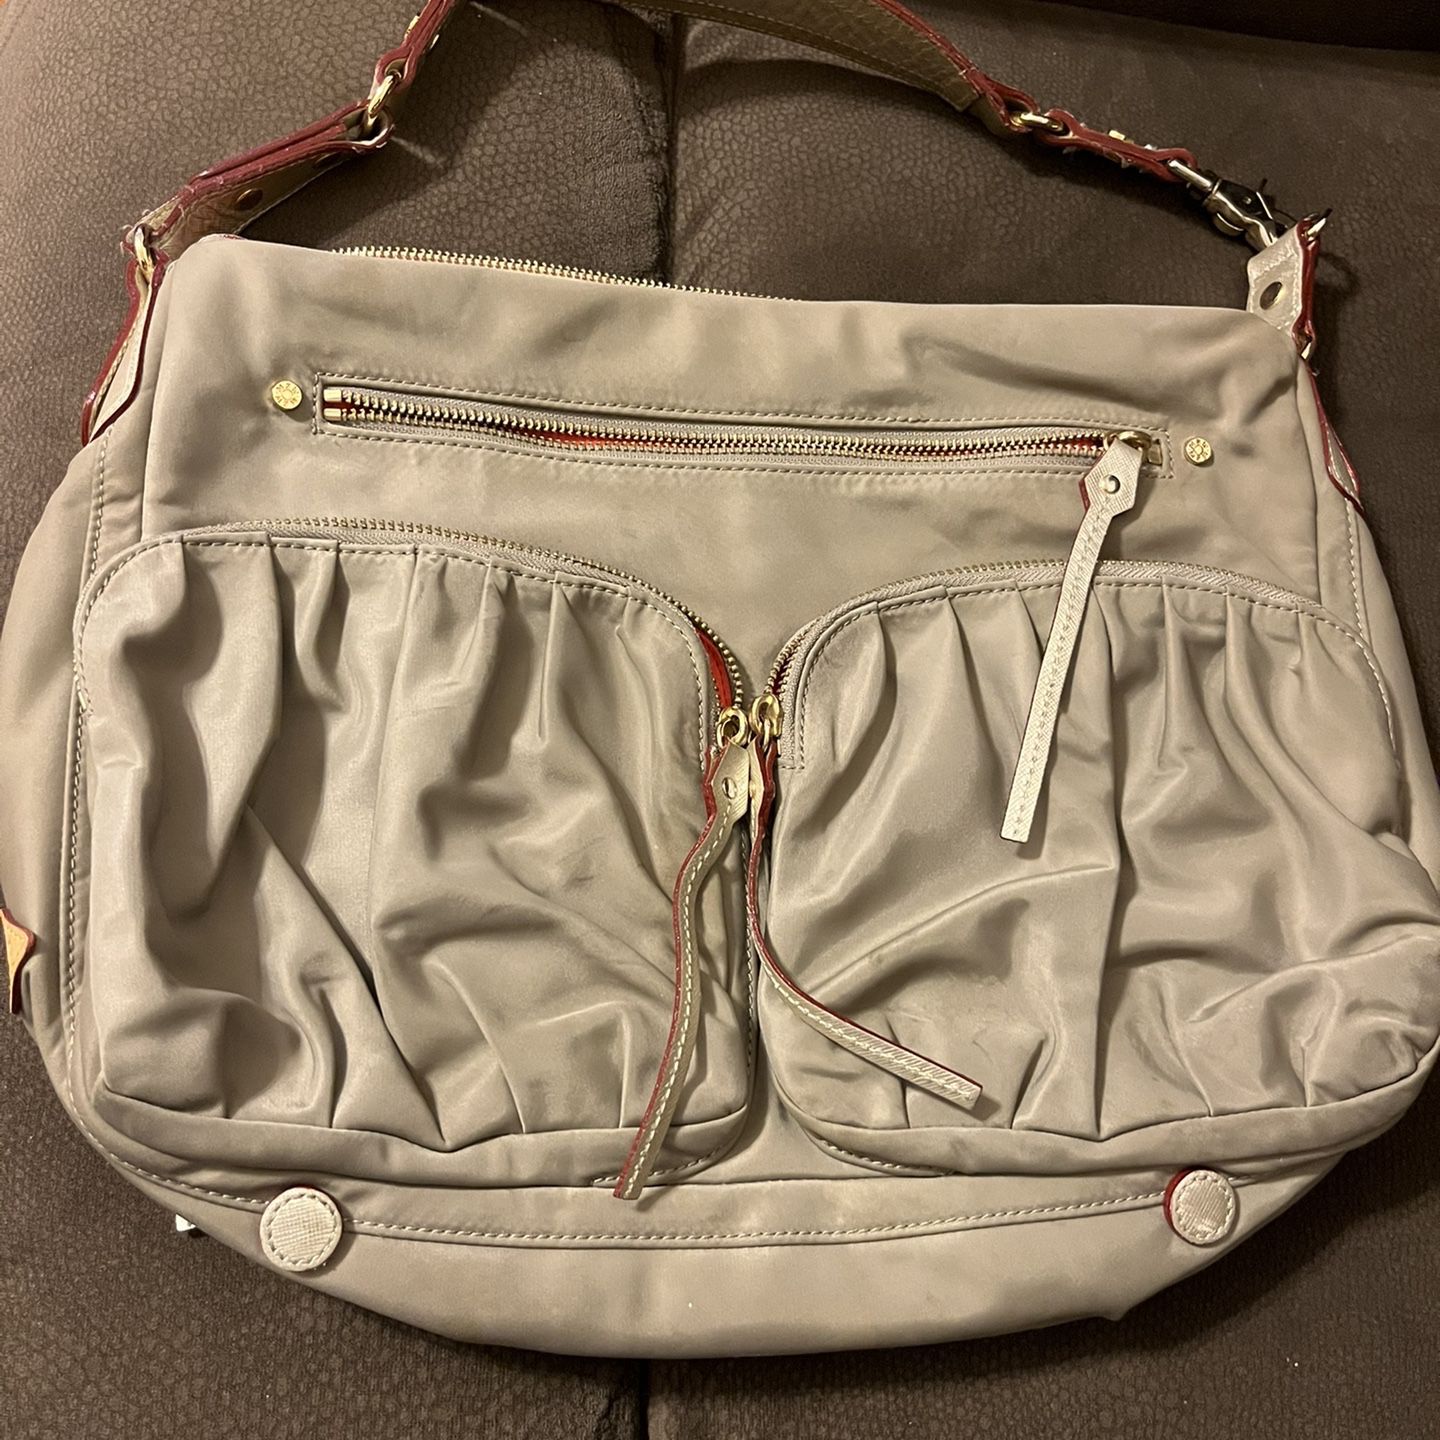 MZ WALLACE Large Crossbody Sling Bag for Sale in Merrick, NY - OfferUp